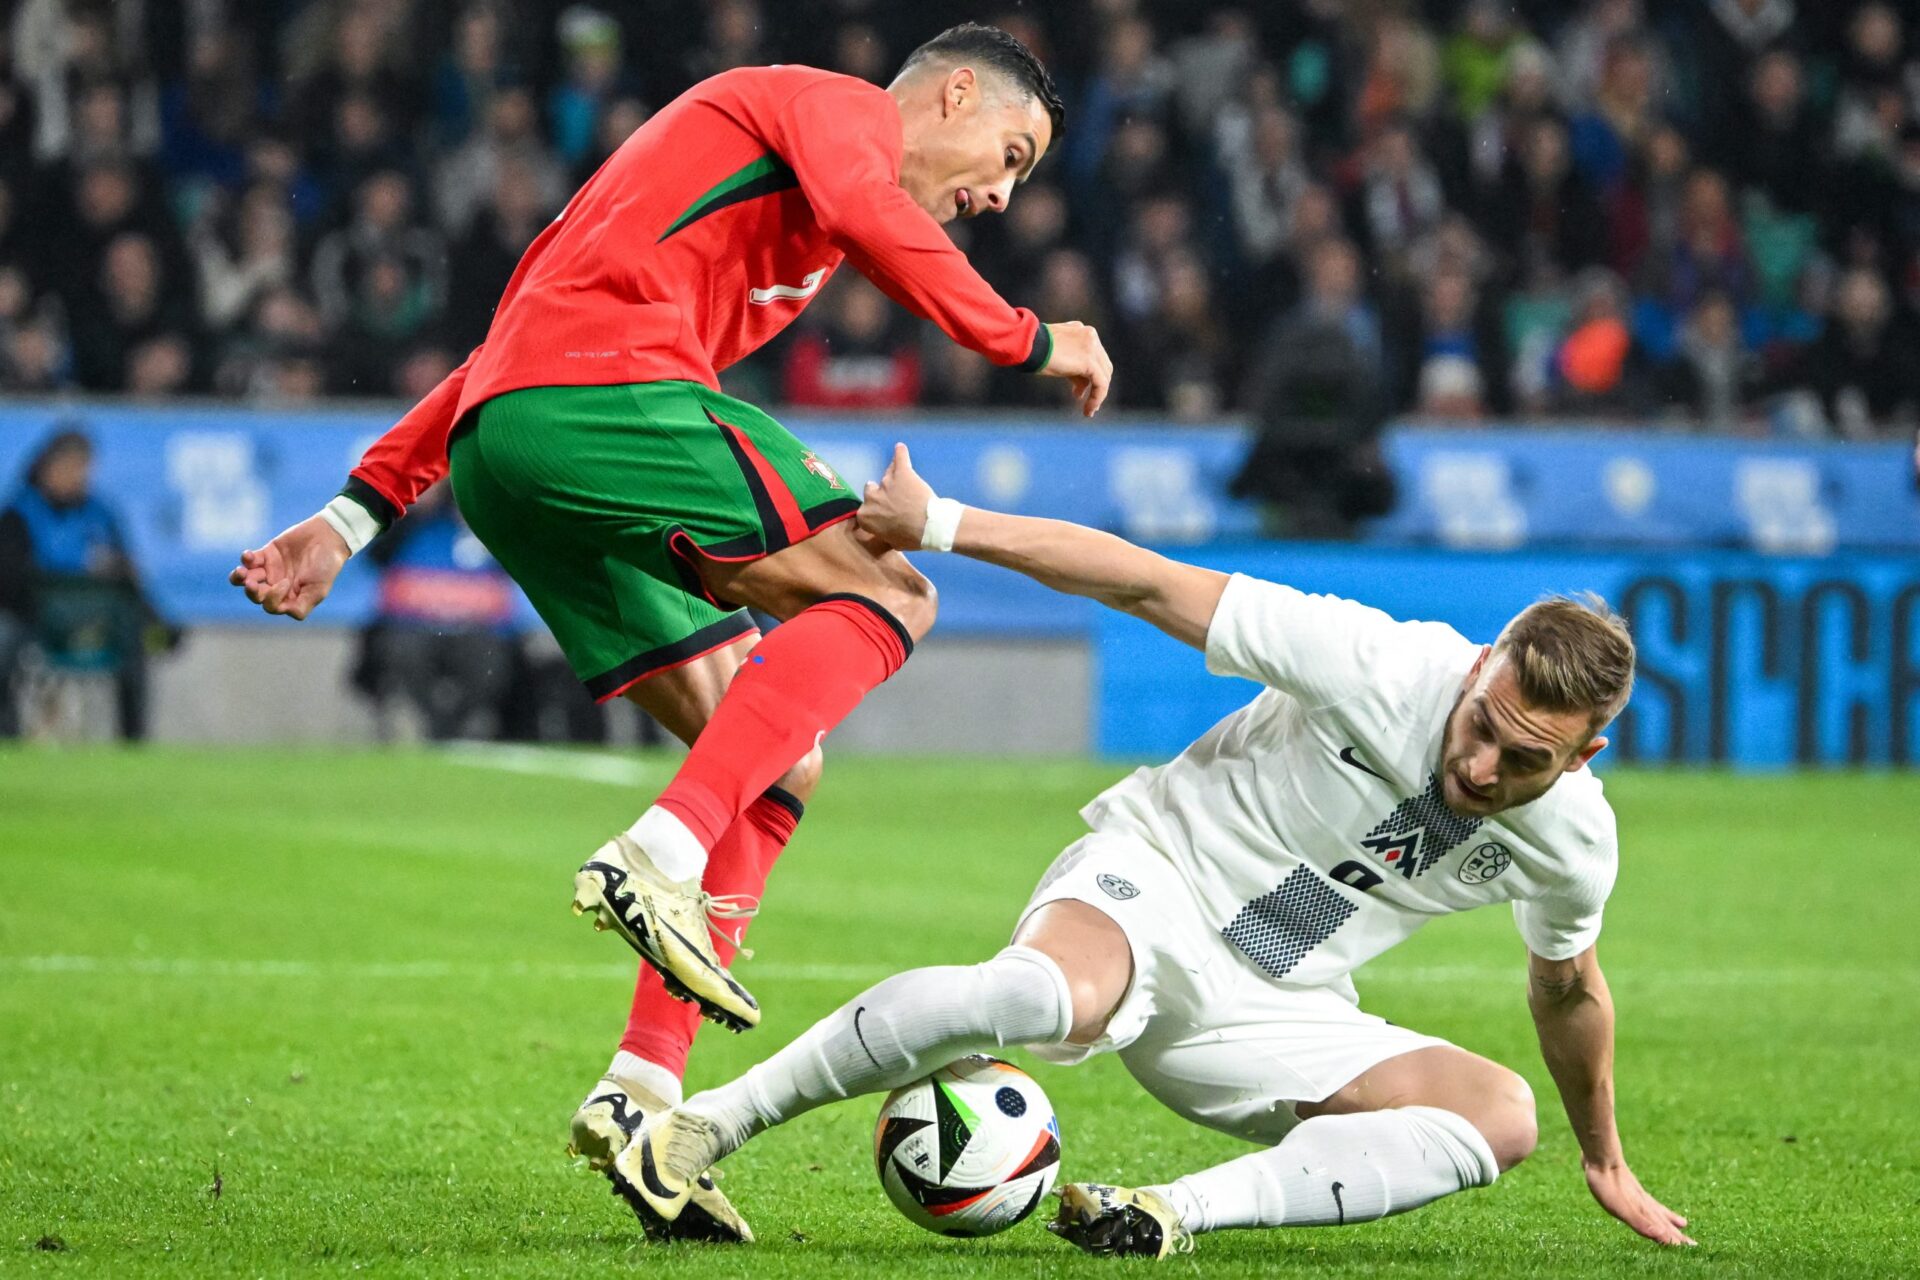 Navigating the Strait: Portugal Sets Sights on Quarterfinals in Tense Clash with Slovenia